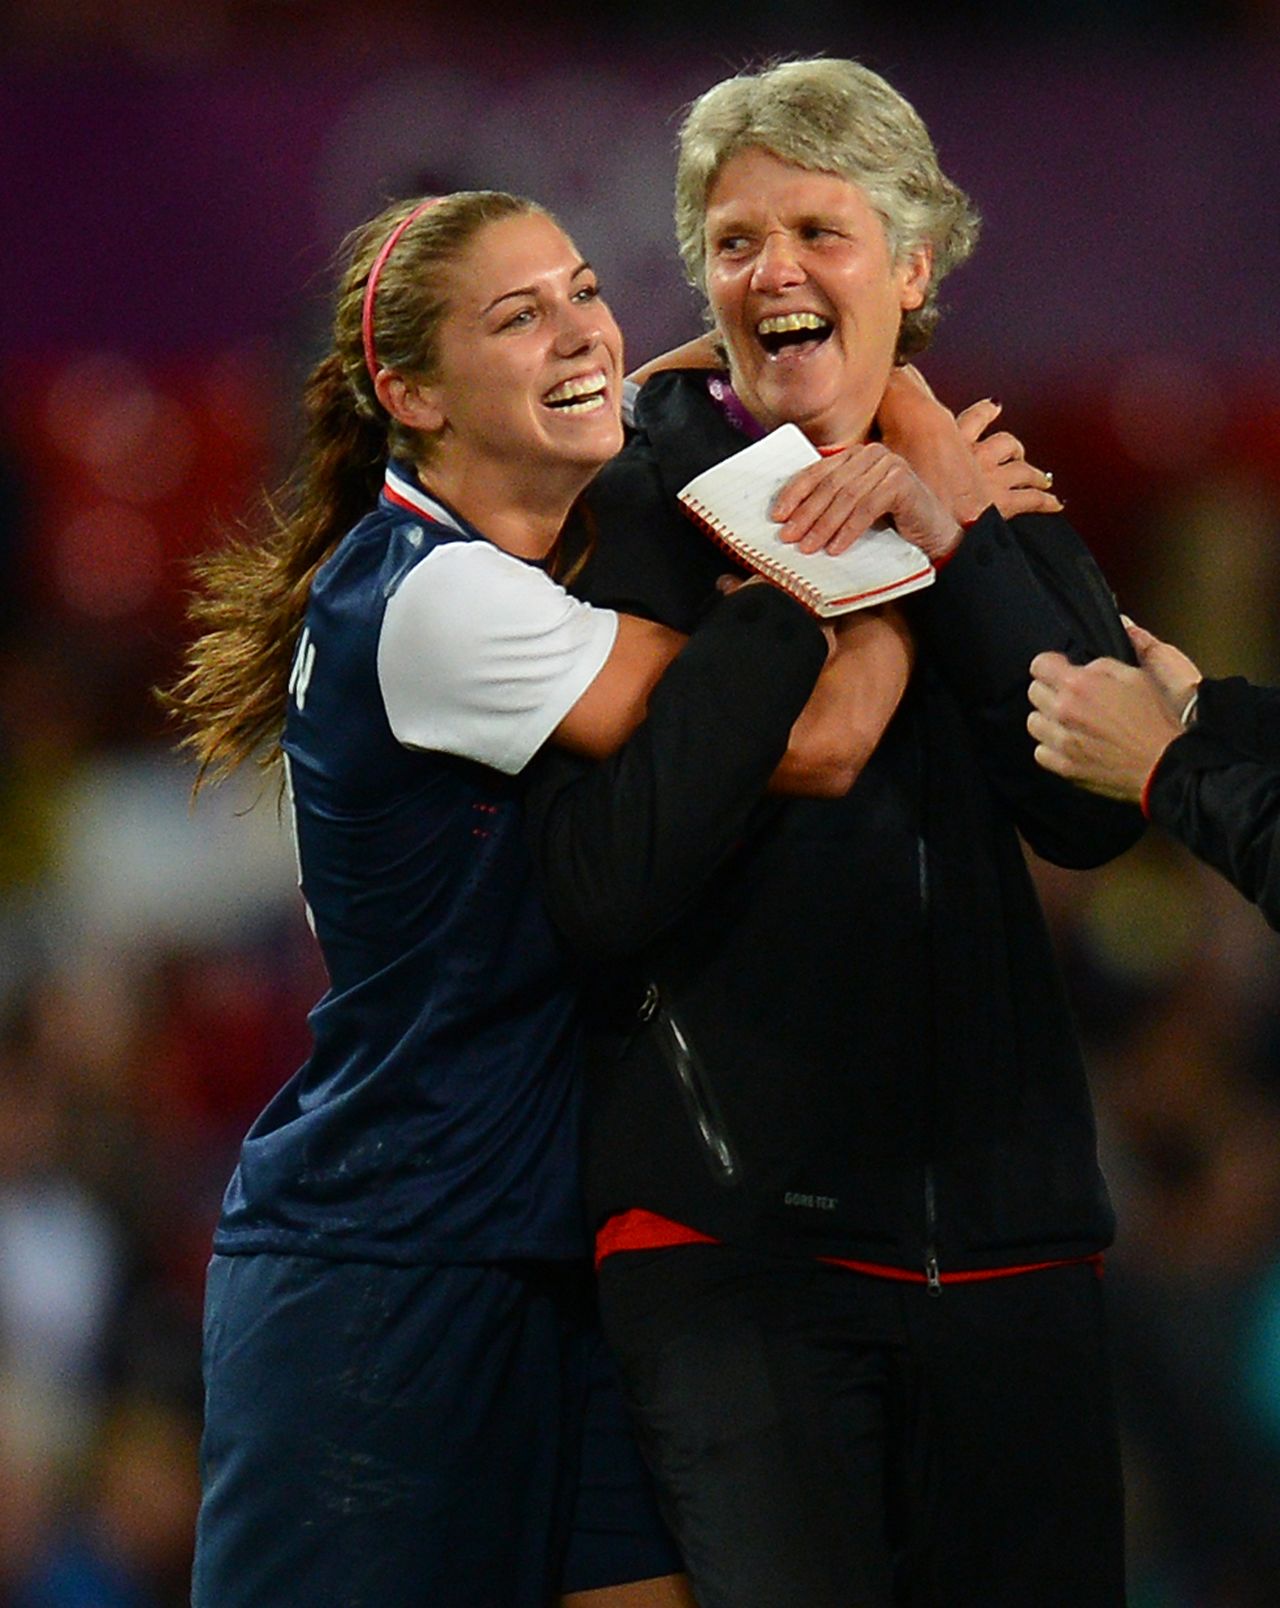 Morgan celebrates with former U.S. coach Pia Sundhage after her winning goal had given the Americans a 4-3 win over Canada at the semifinal stage of London 2012. Sundhage, now coach of her native Sweden, guided the USWNT to successive Olympic gold medals.